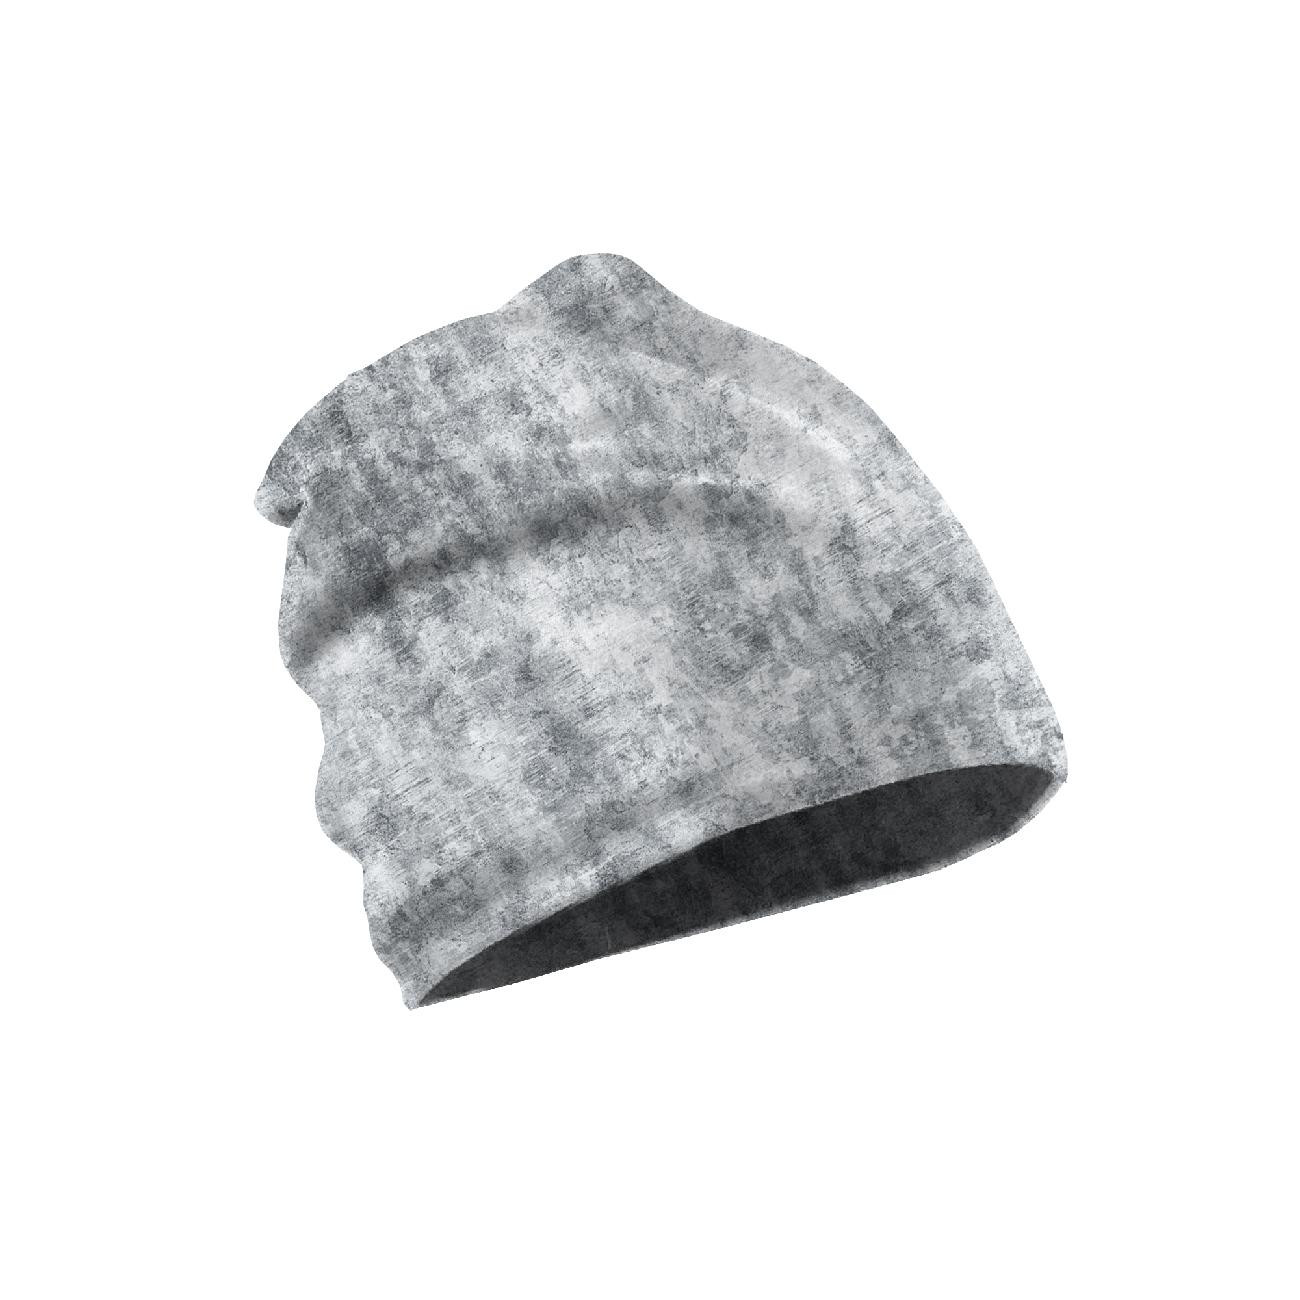 KID'S CAP AND SCARF (CLASSIC) - GRUNGE (light grey) - sewing set